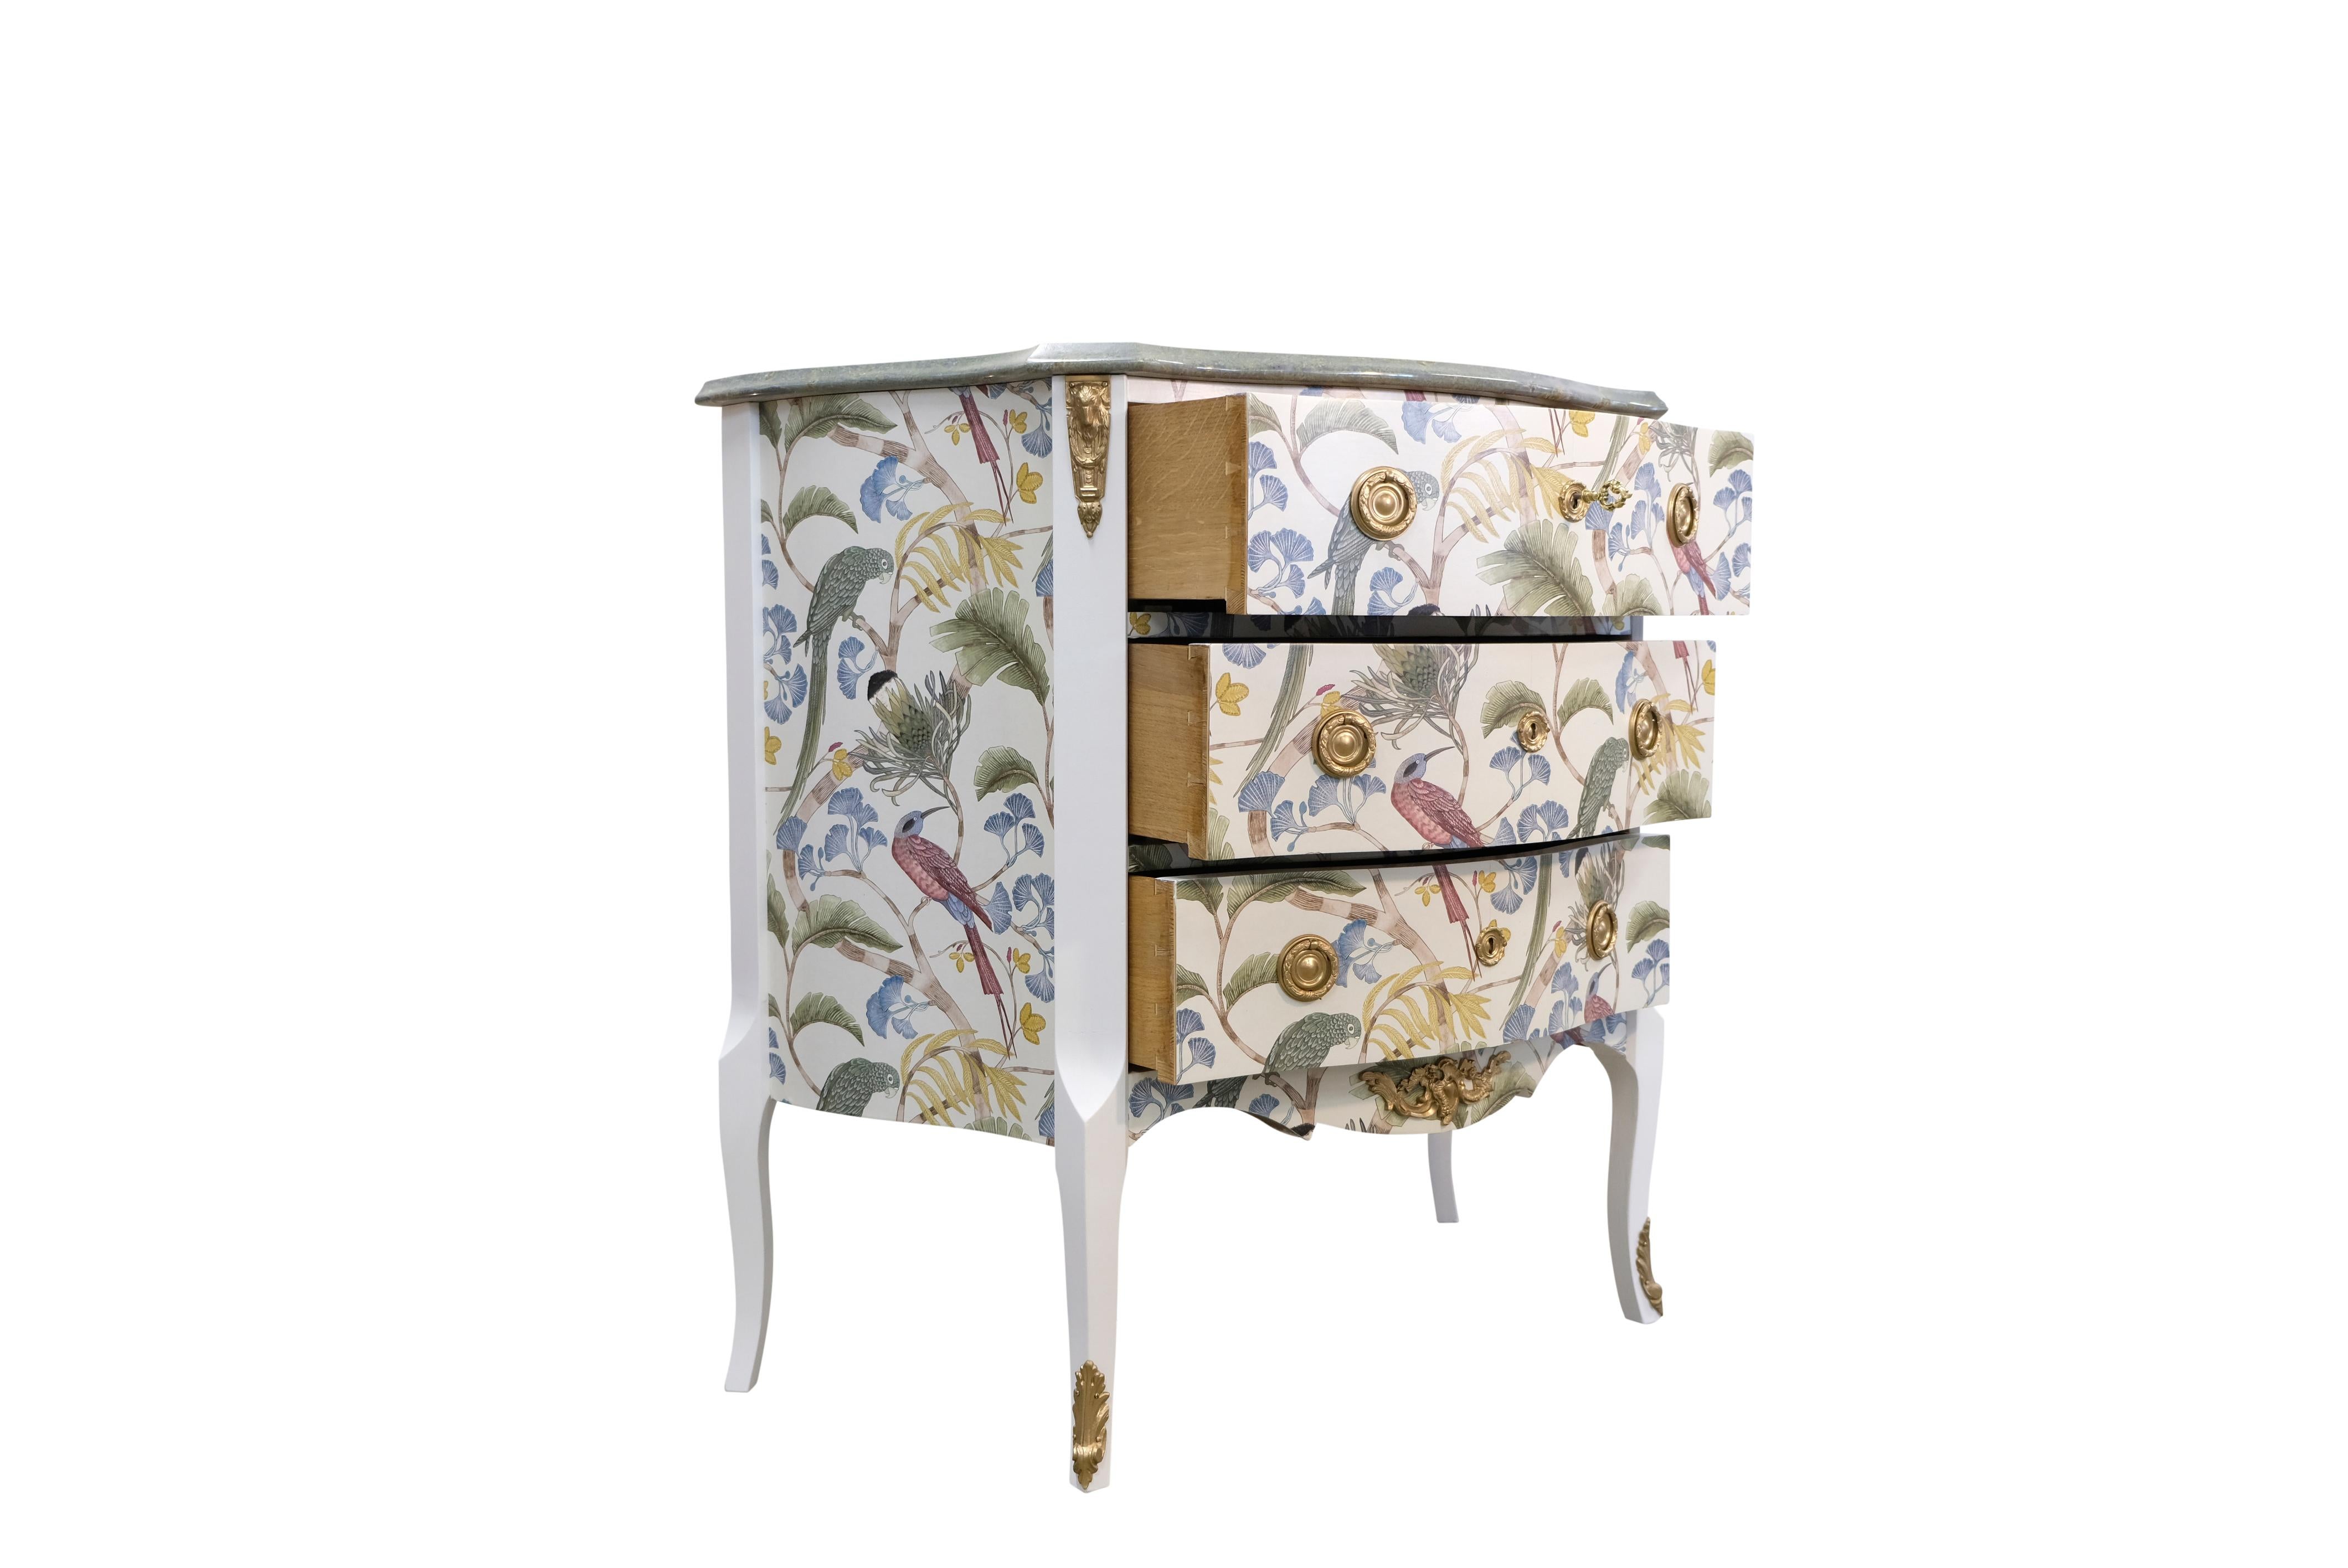 Gustavian Style Commode in Antique White with Exotic Birds Design and Marble Top. Fine original fittings in solid brass. 
Width: 83cm / 32.7